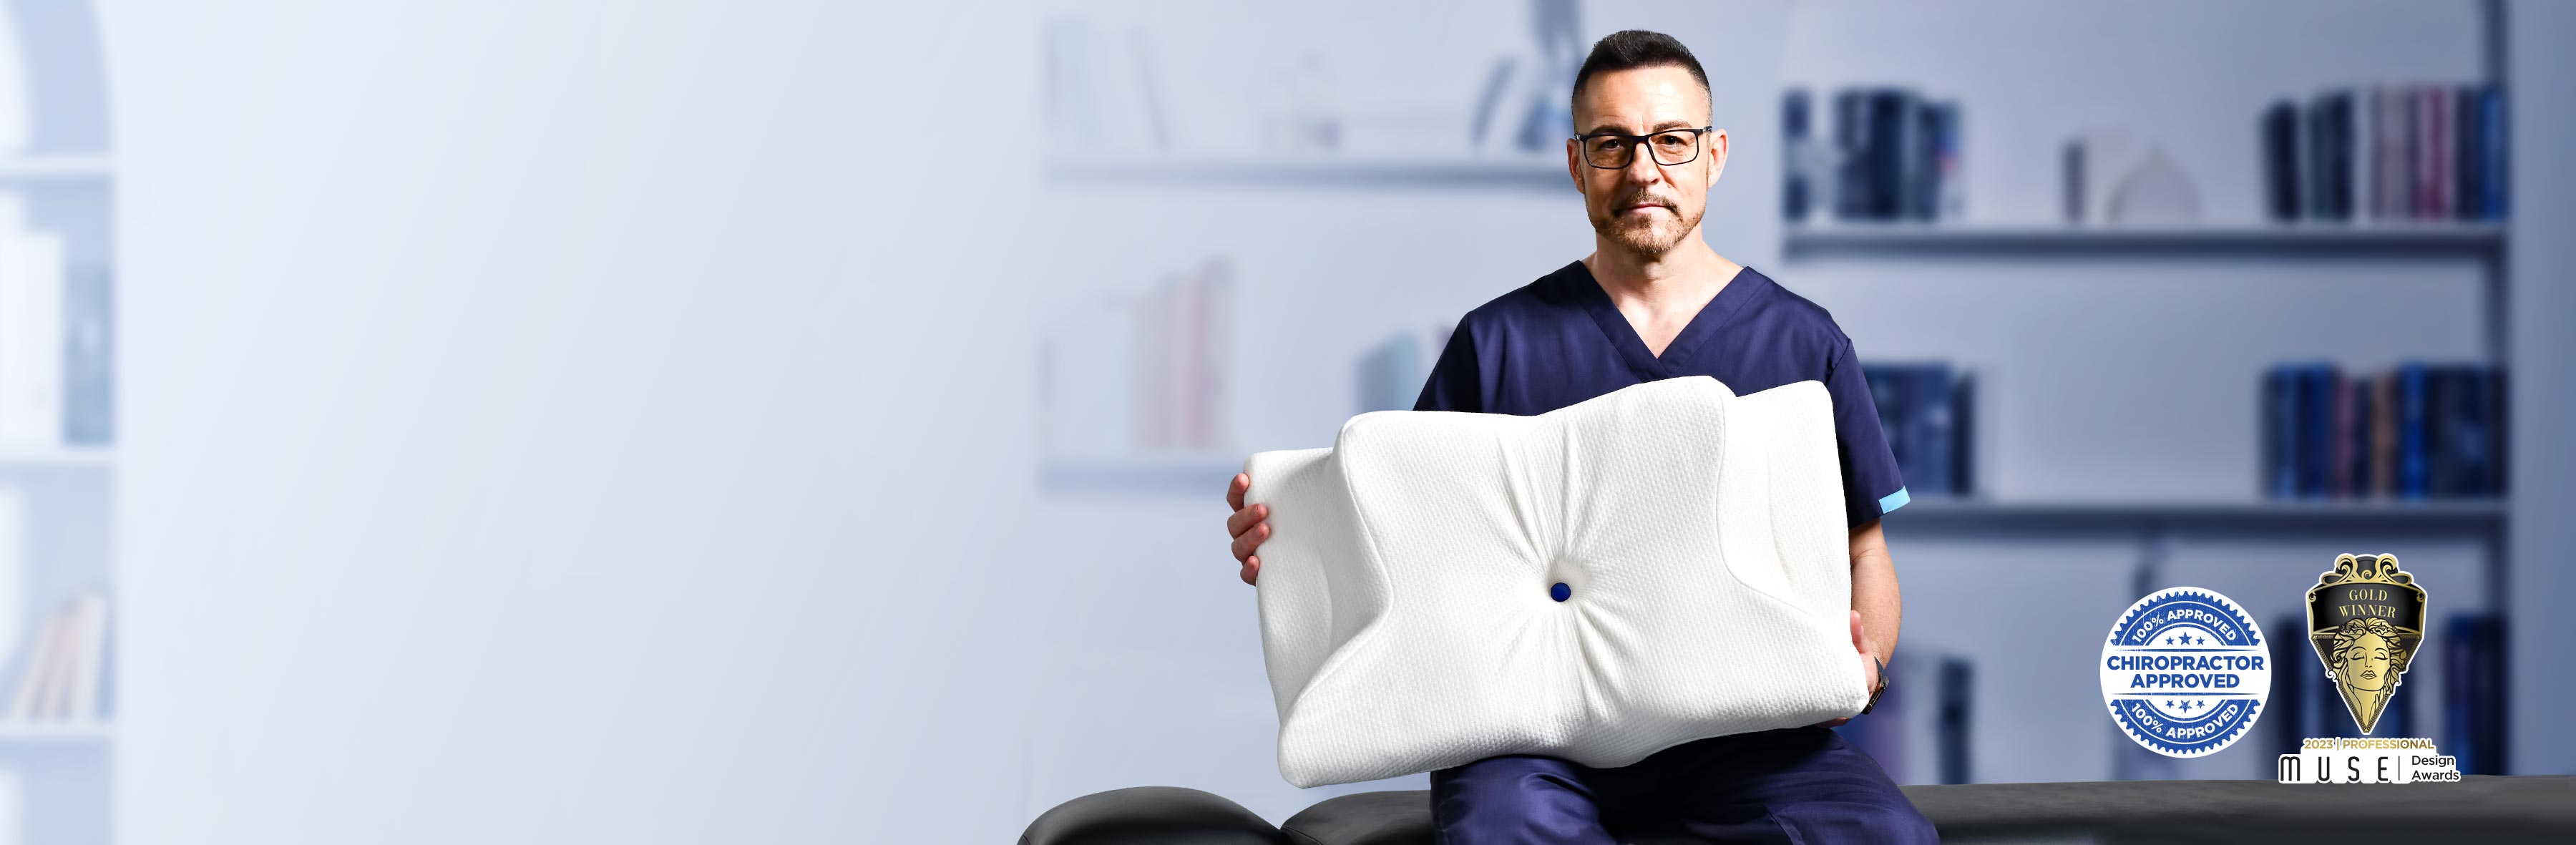 zamat_chiropractor_approved_neck_support_pillow